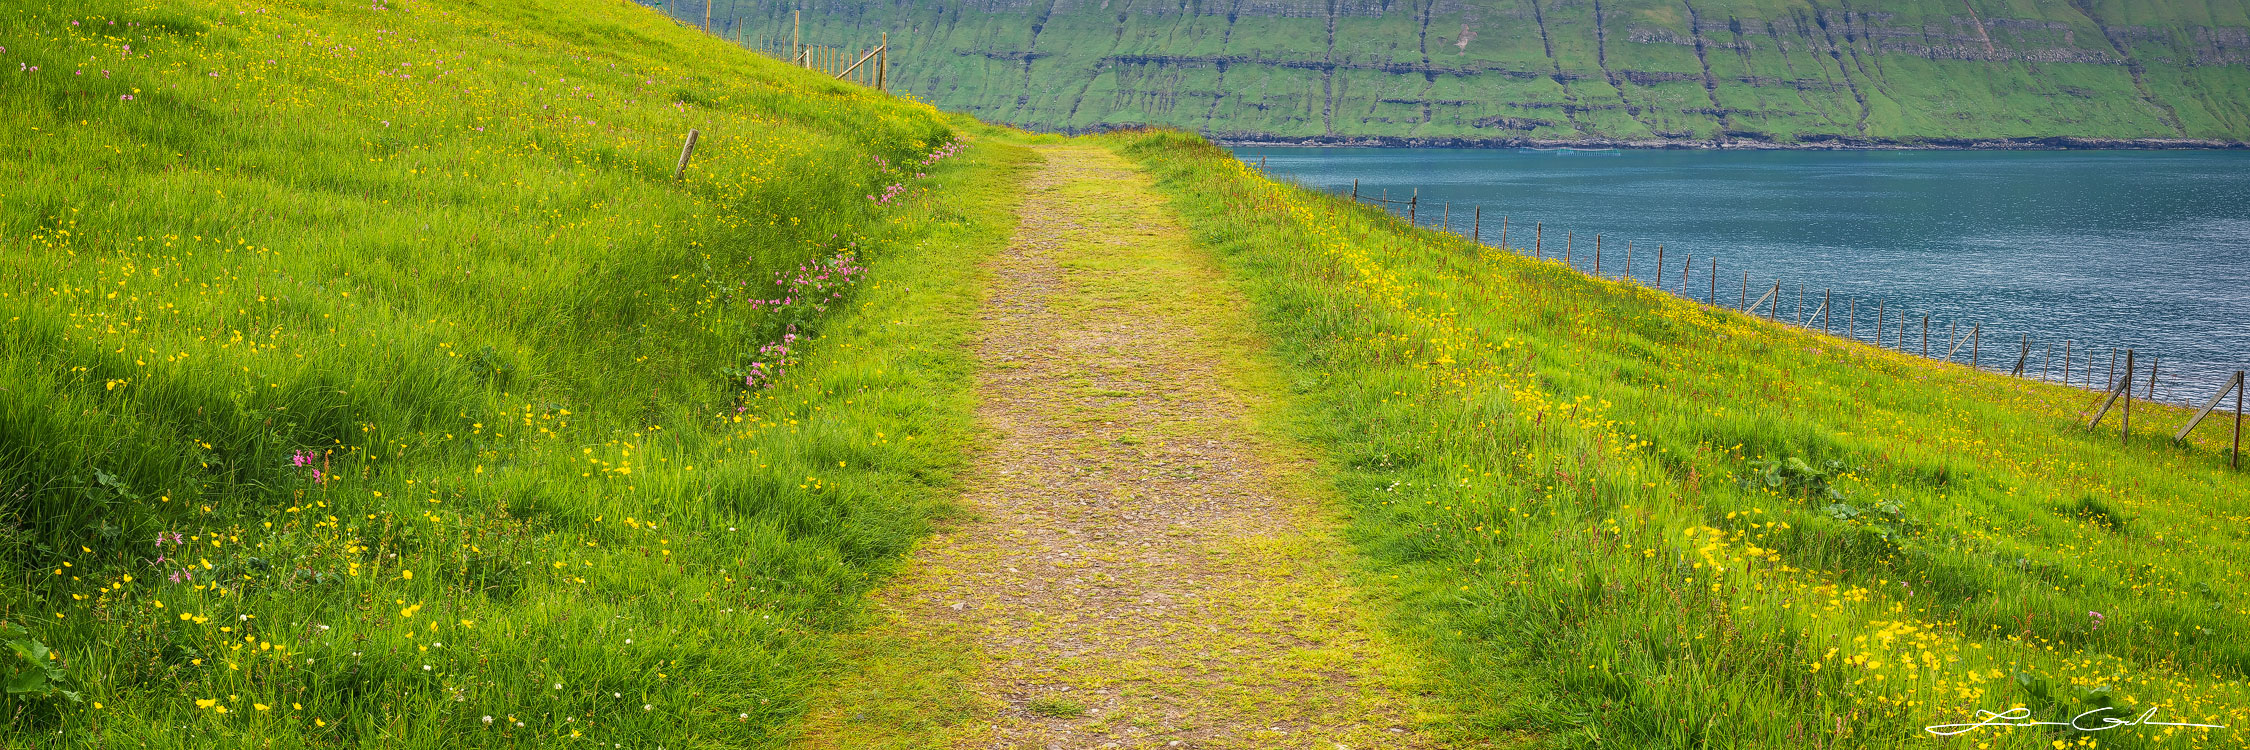 A beautiful path on the side of a coastal hill covered with lush grass and wildflowers by the ocean - Faroe Islands - Gintchin Fine Art